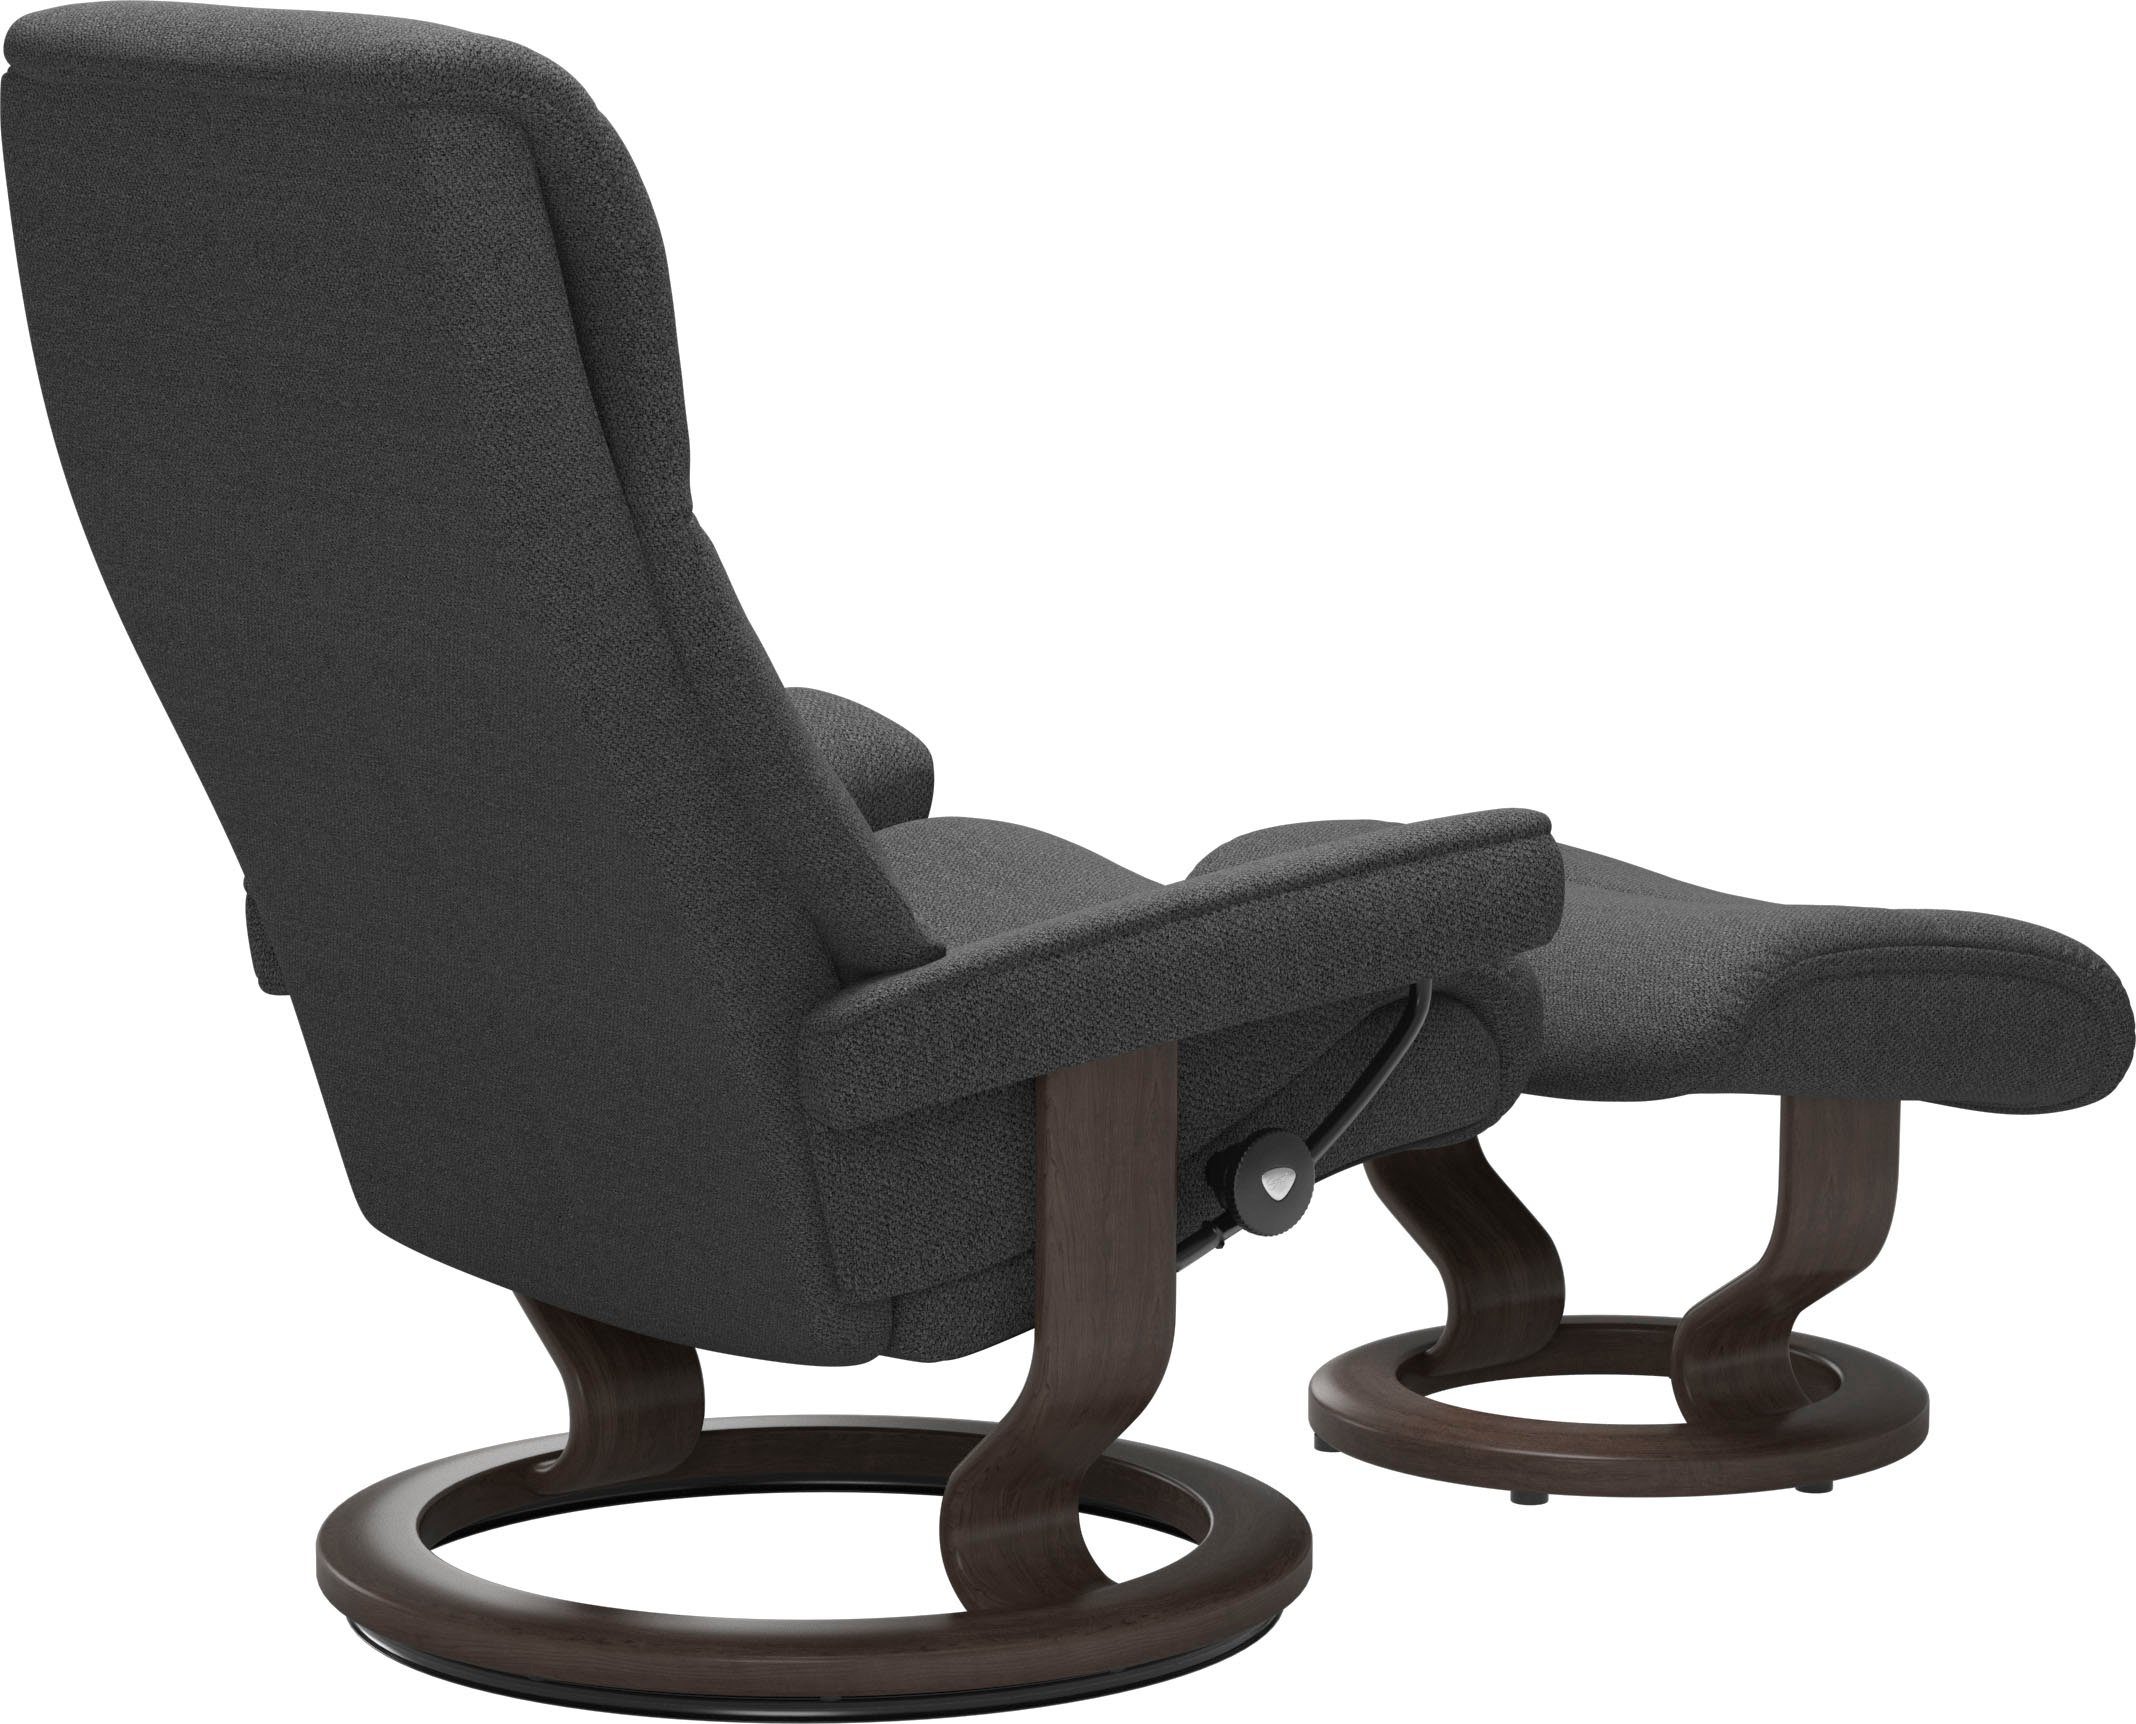 Classic mit Base, Größe Relaxsessel Stressless® View, Wenge S,Gestell